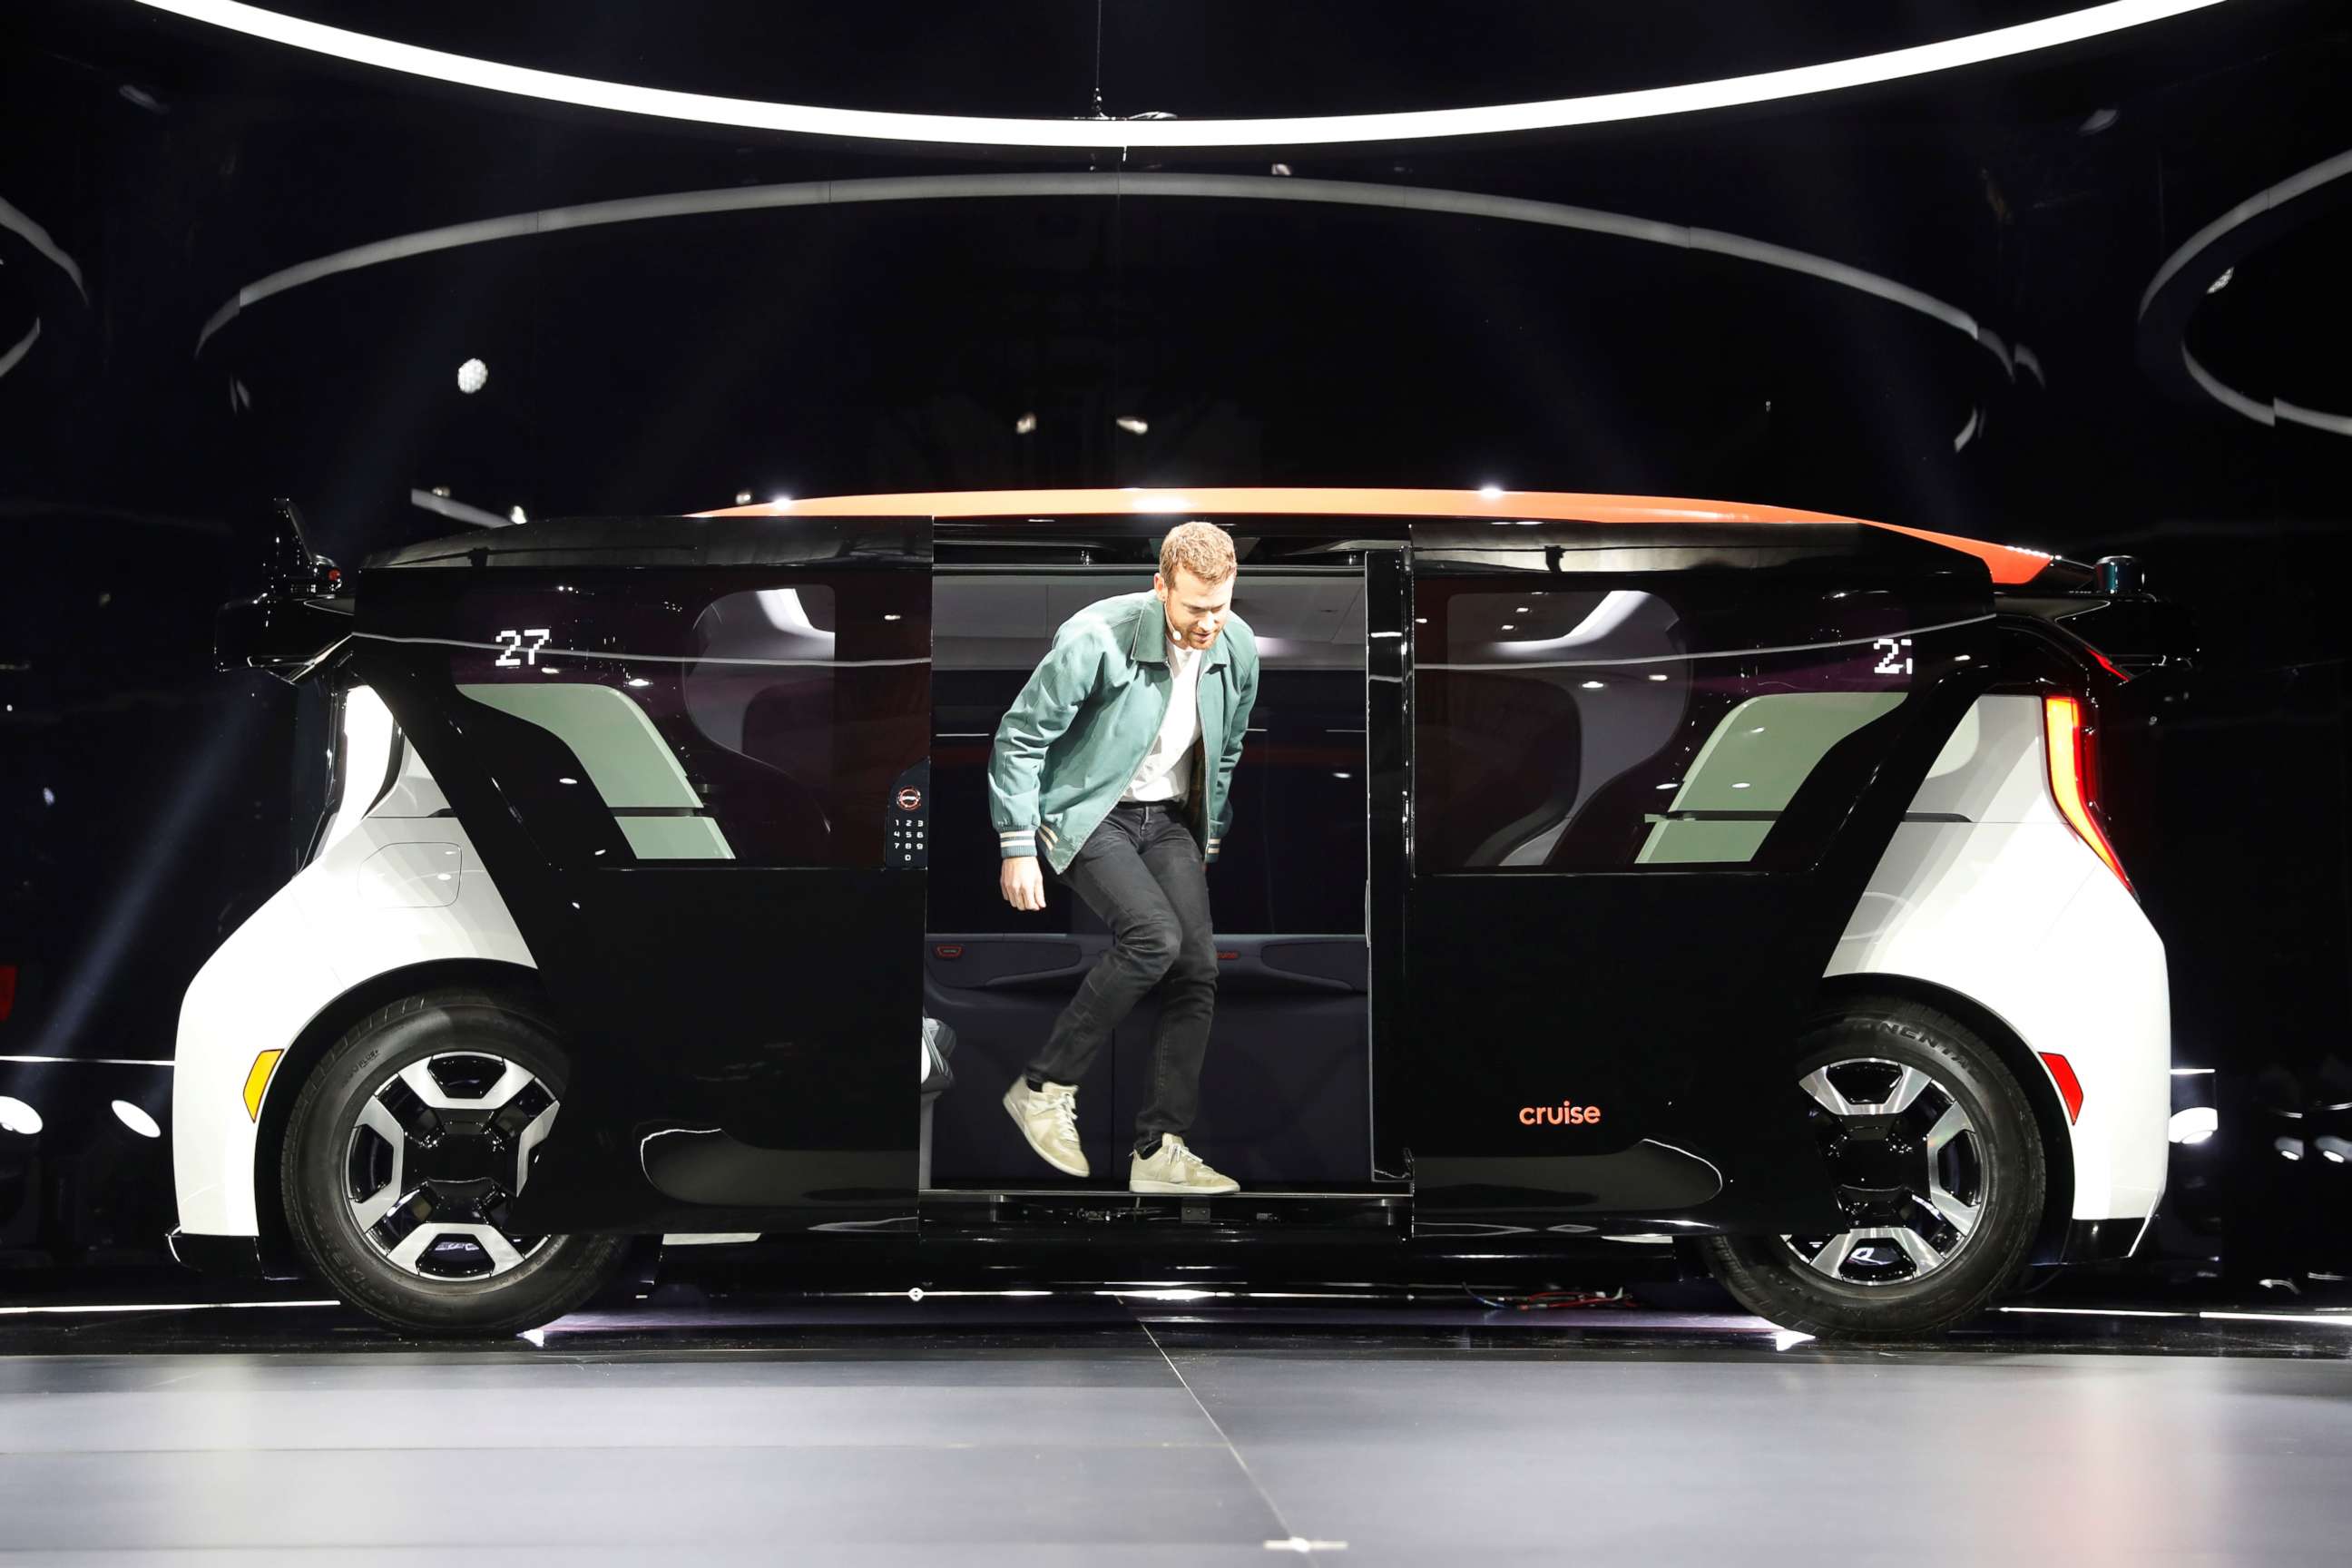 PHOTO: Kyle Vogt, chief technology officer, president & co-founder of Cruise, a Honda and General Motors self-driving car partnership, disembarks from a Cruise Origin autonomous vehicle during its unveiling in San Francisco on Jan. 21, 2020.